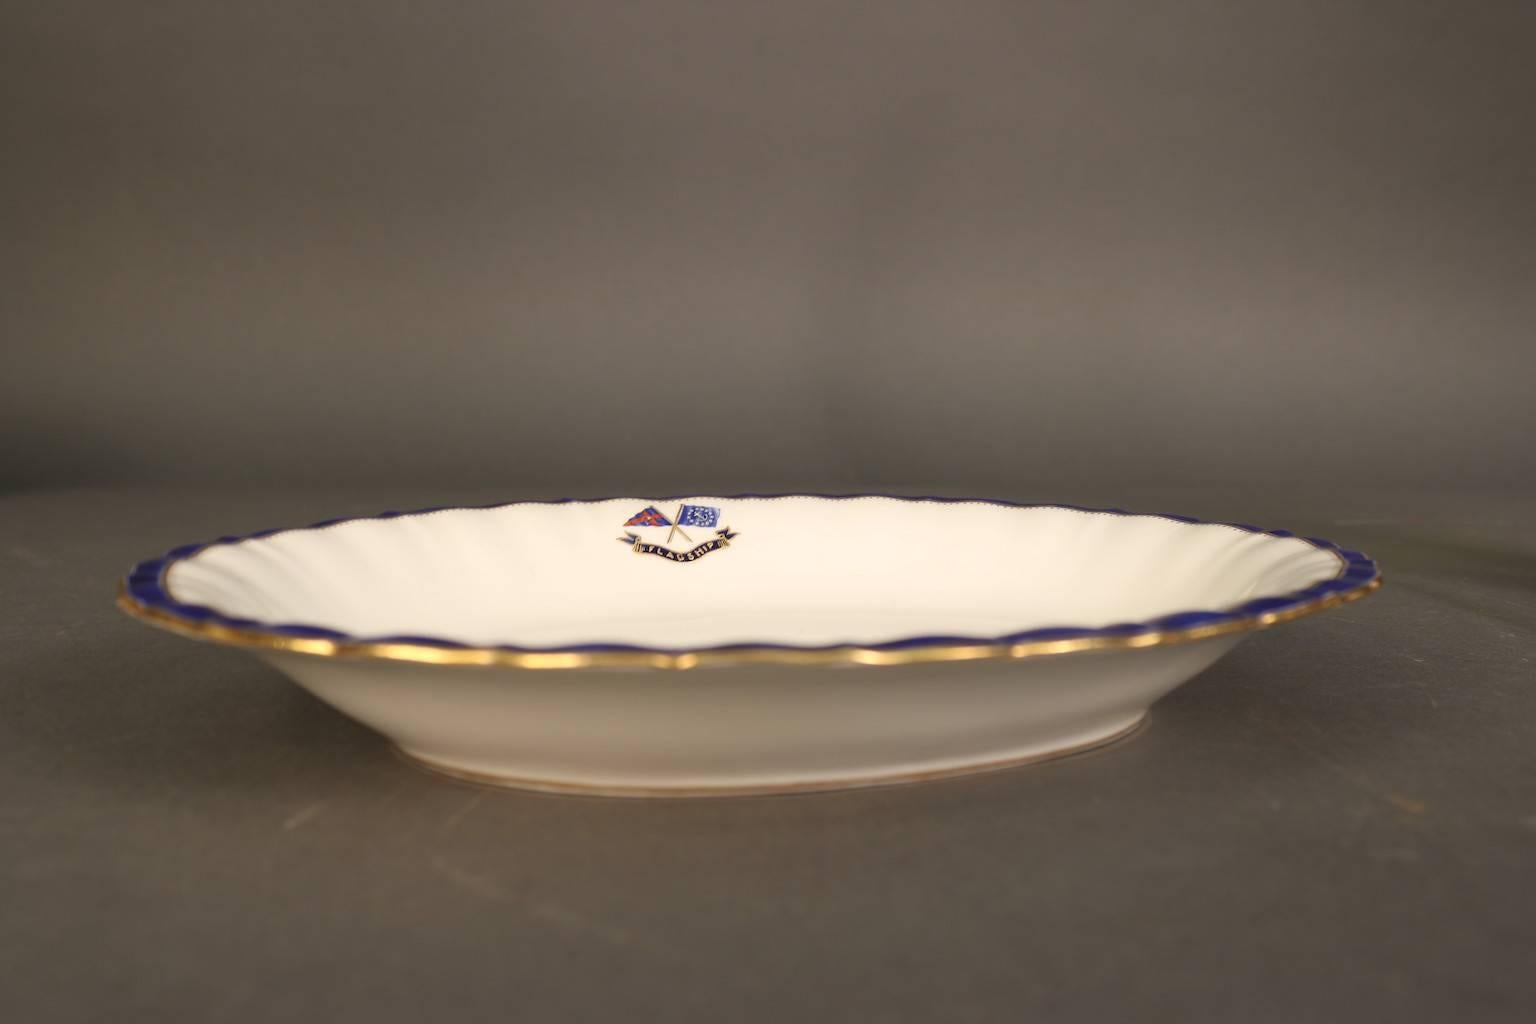 Personal dinnerware made exclusively for J. Pierpont Morgan (1837-1913) for use aboard his Flagship Corsair, built in 1890. This scalloped flagship corsair serving platterl by Minton's has the J. Pierpont Morgan signature navy blue trim with gold